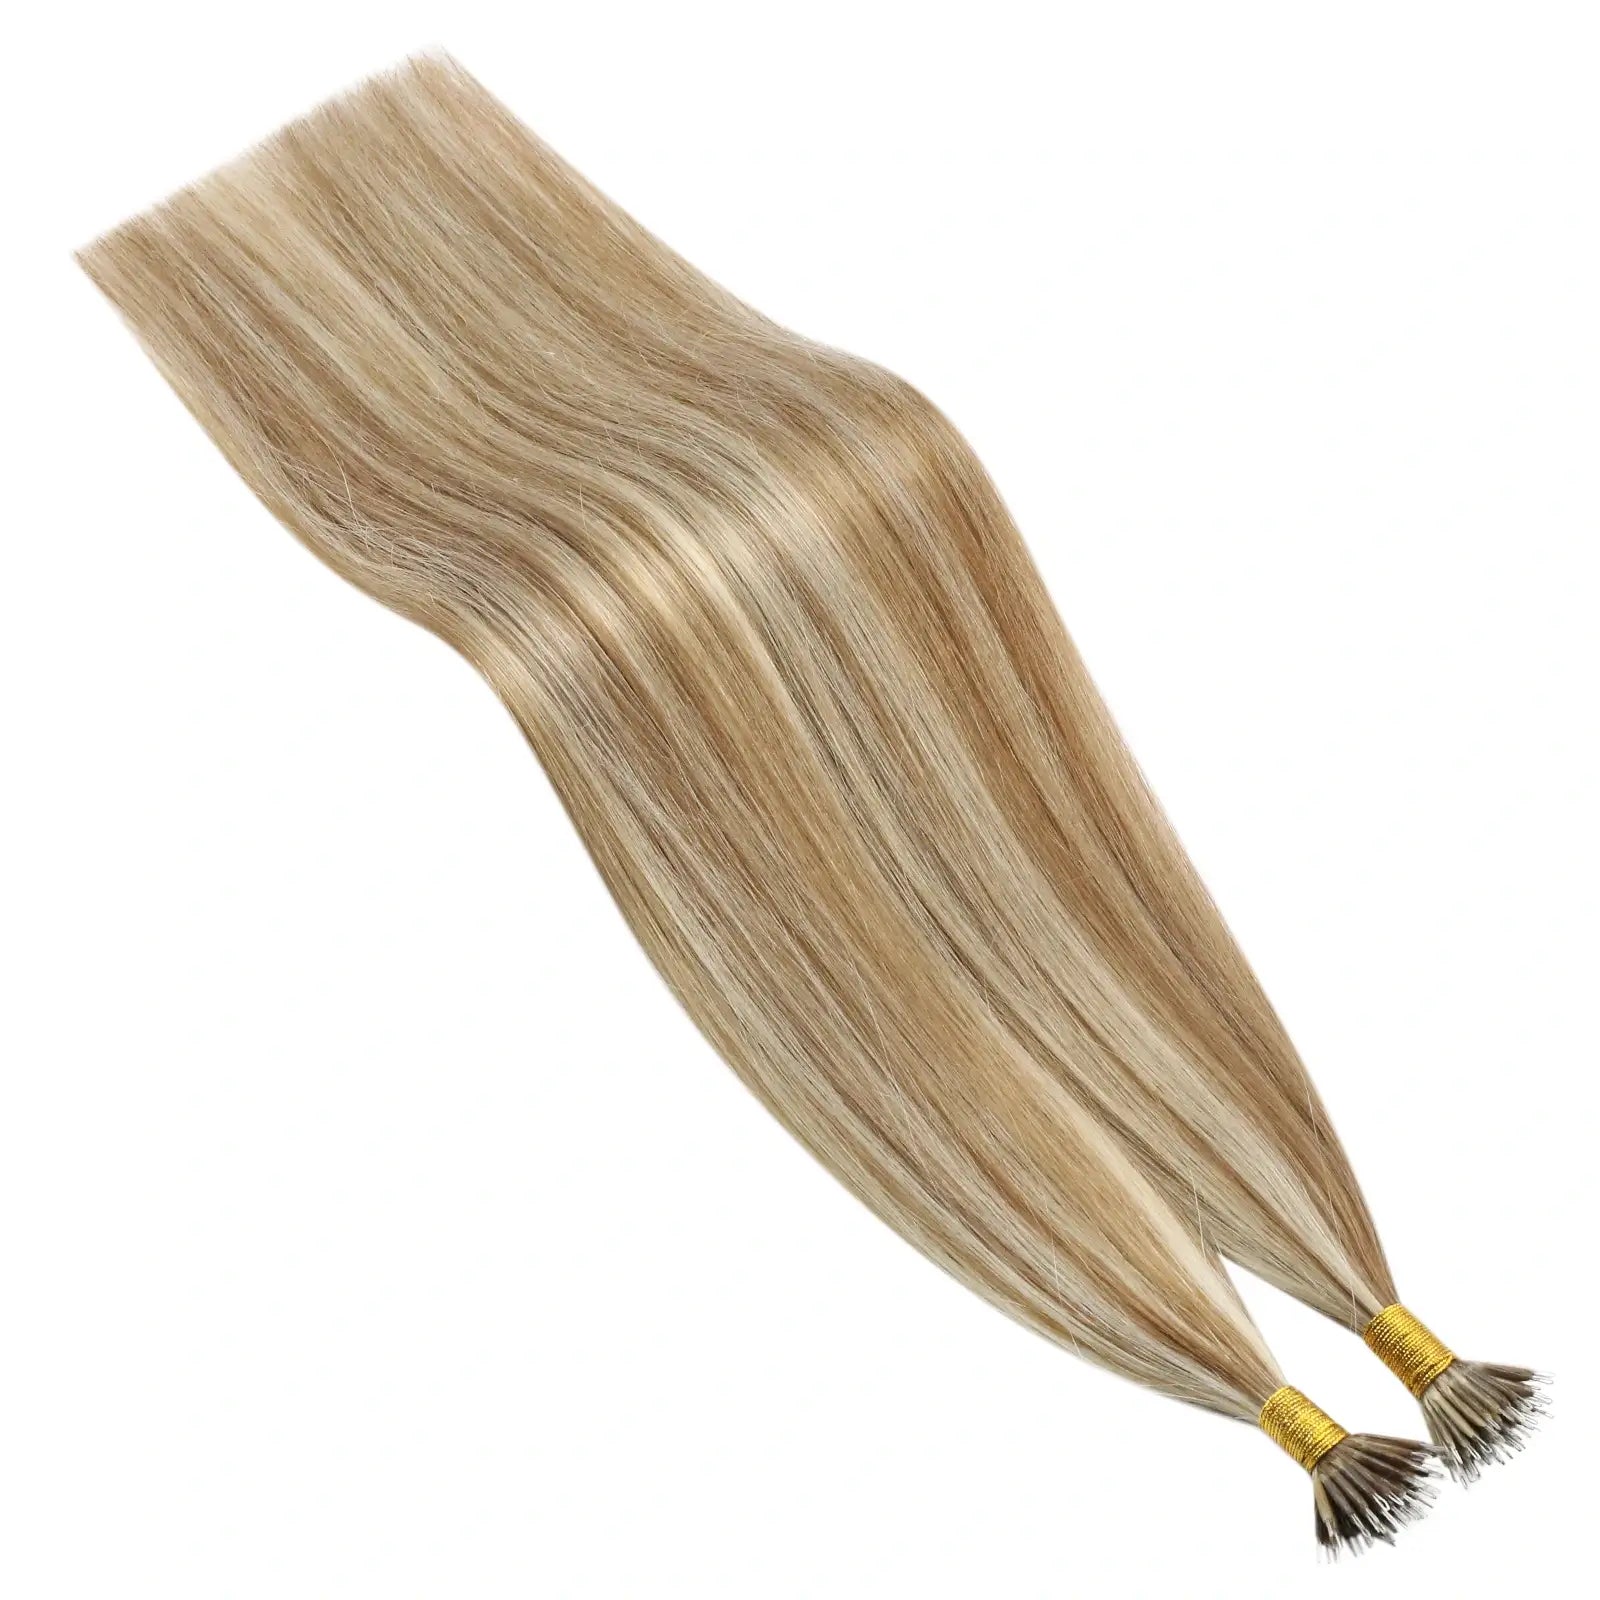 NanoHairExtensionsHumanHair18inchNanoLoopHairExtensions